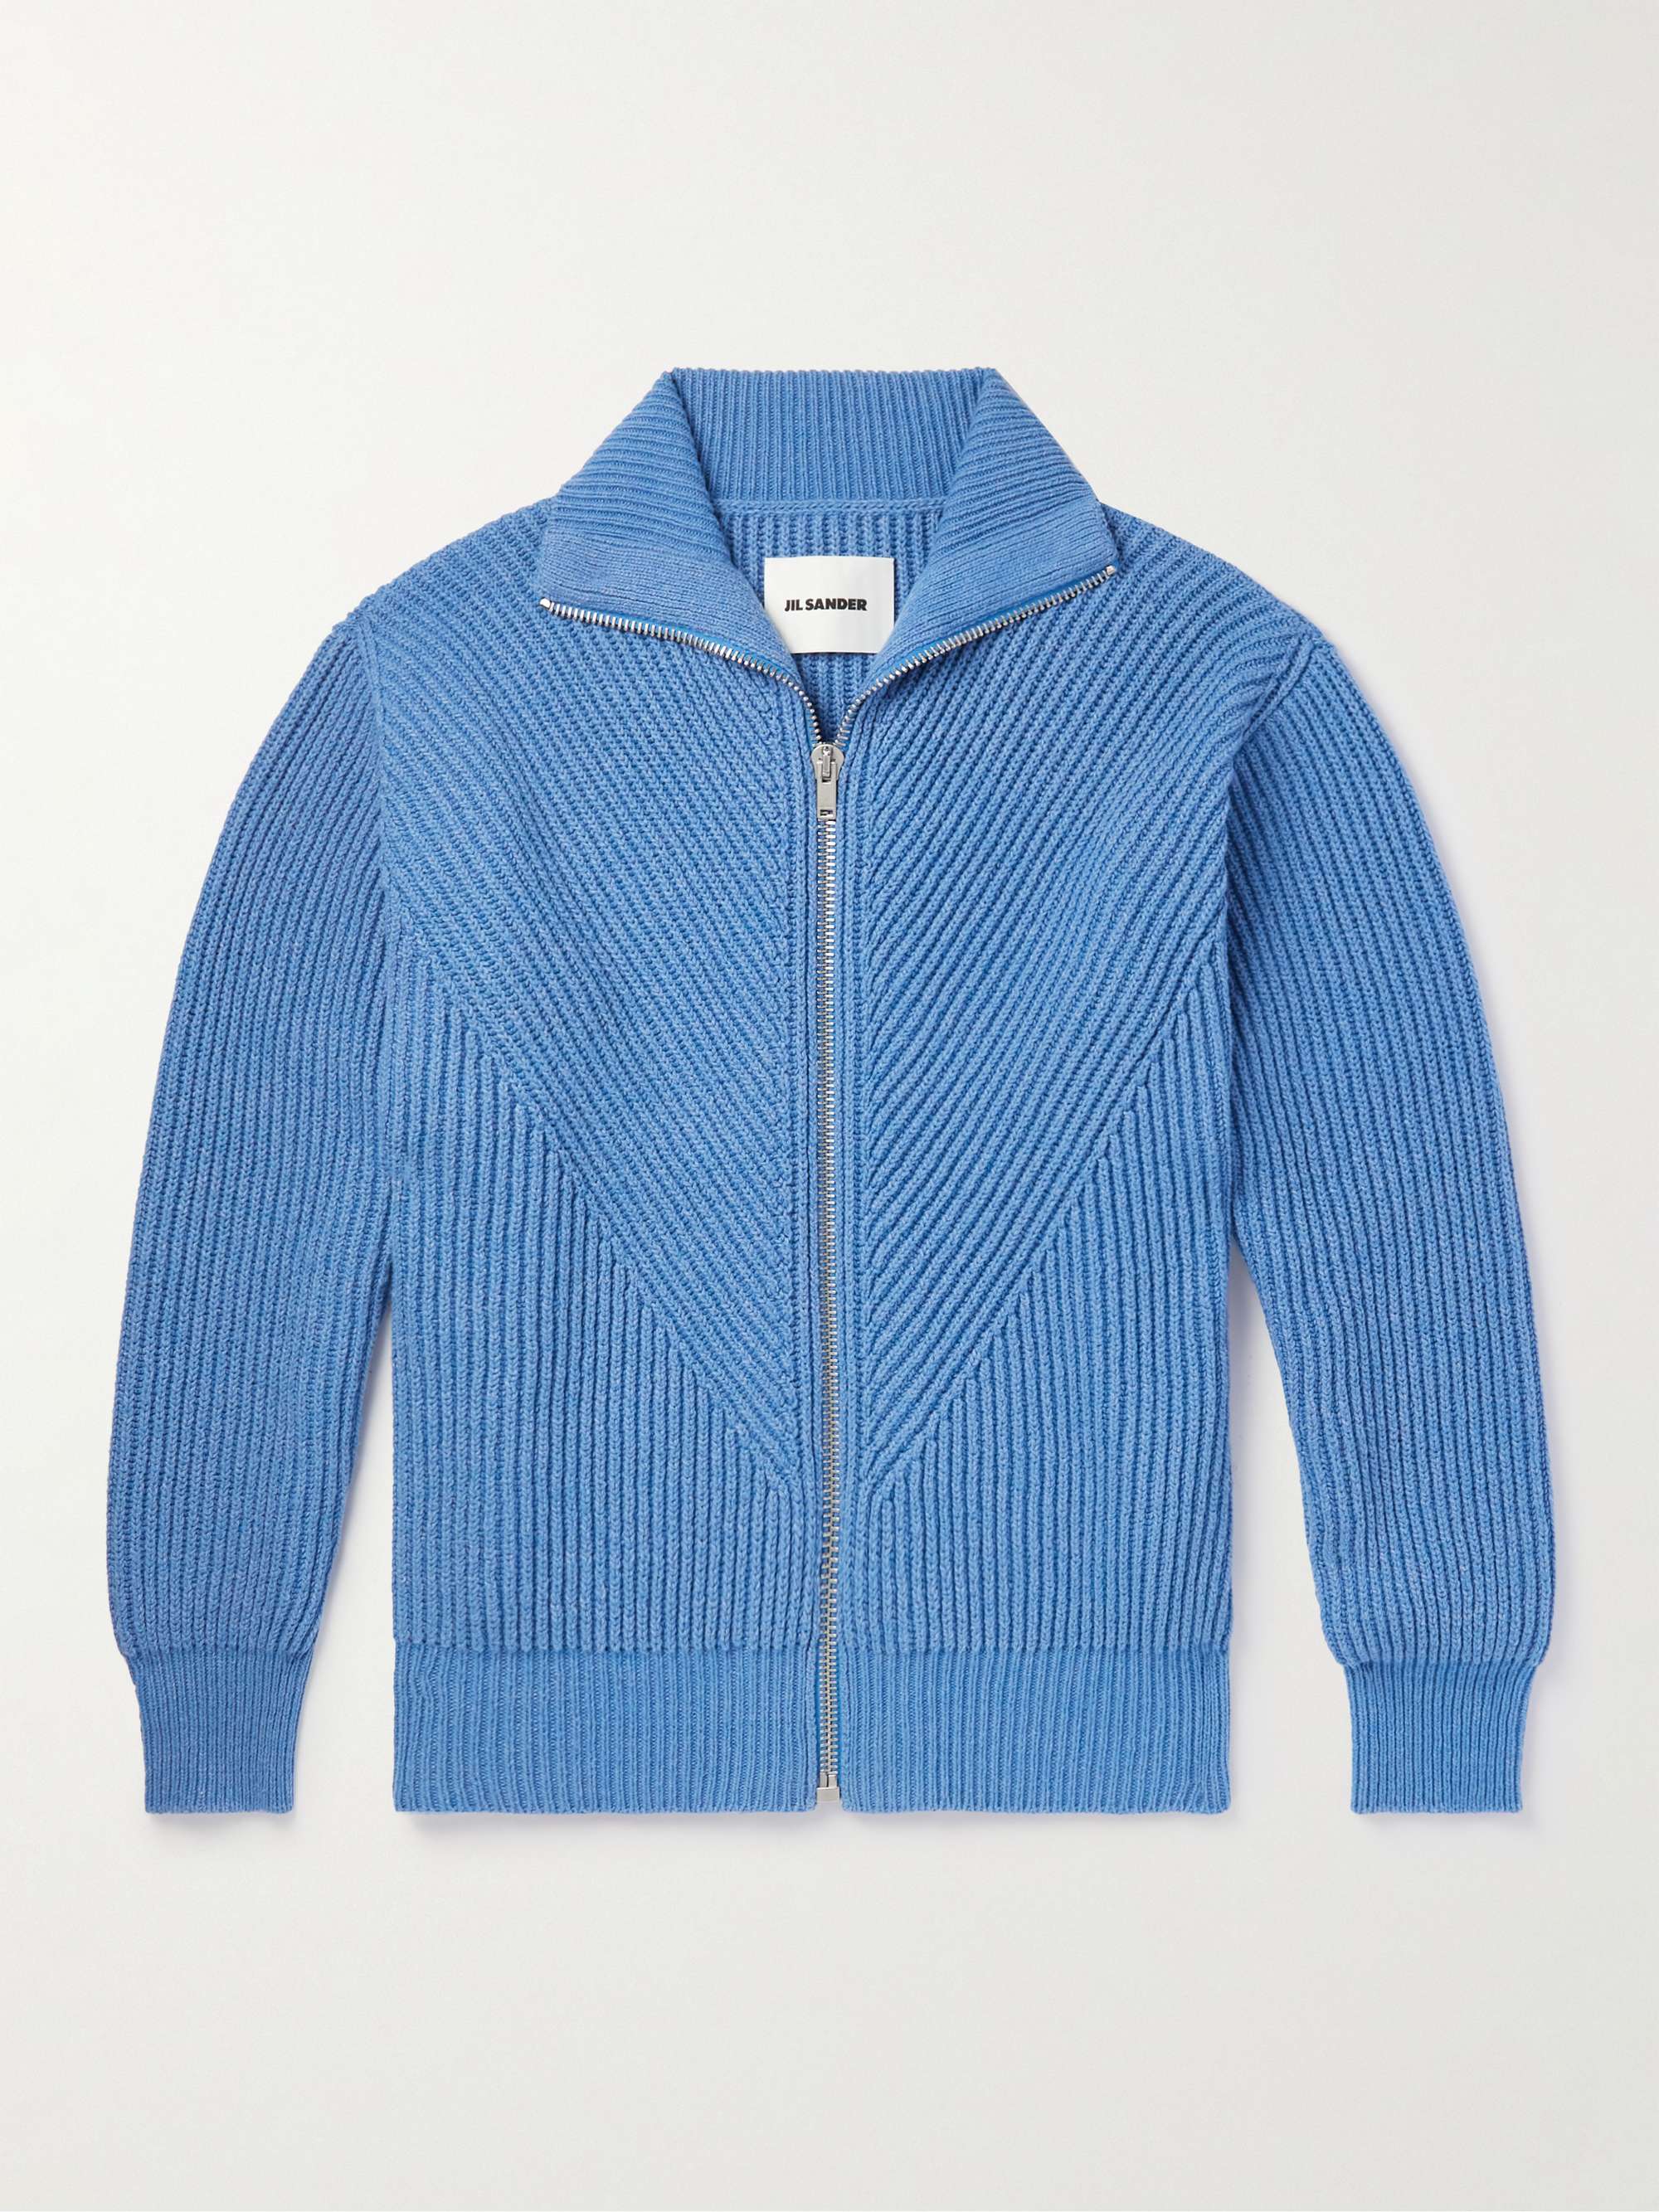 JIL SANDER Ribbed Cotton and Wool-Blend Zip-Up Sweater